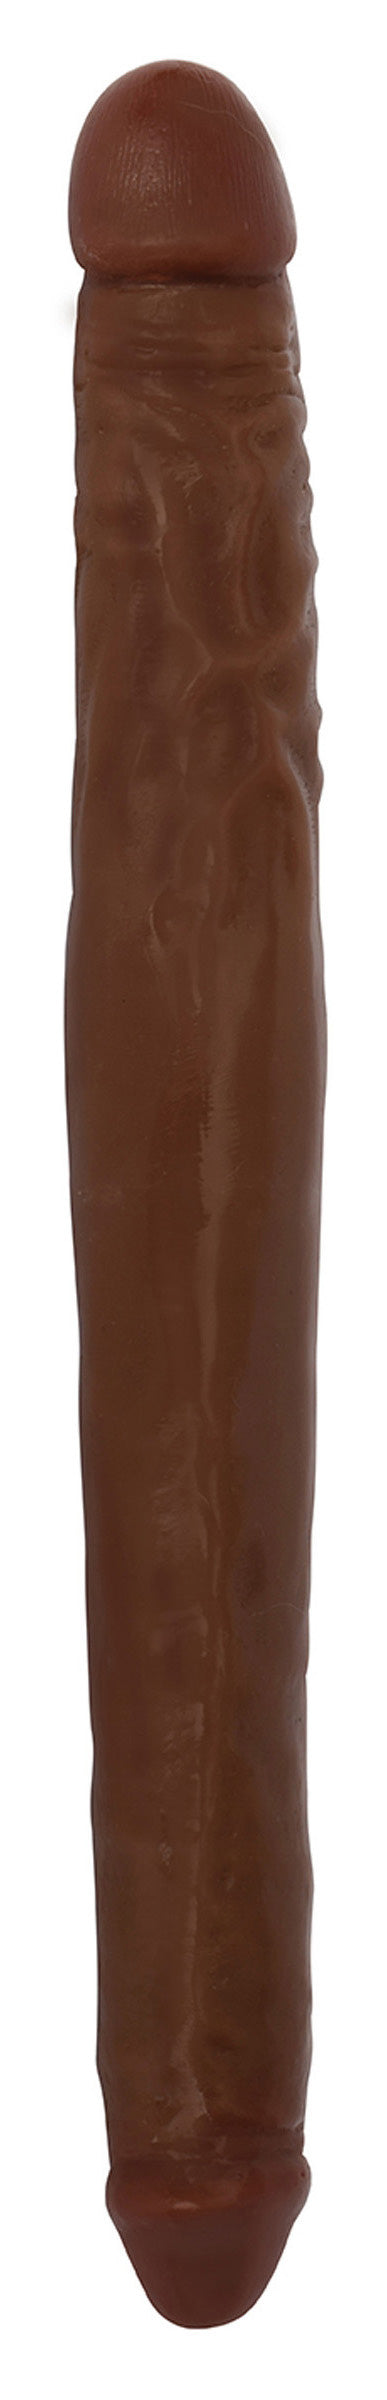 JOCK 16 Inch Tapered Double Dong Brown - UABDSM